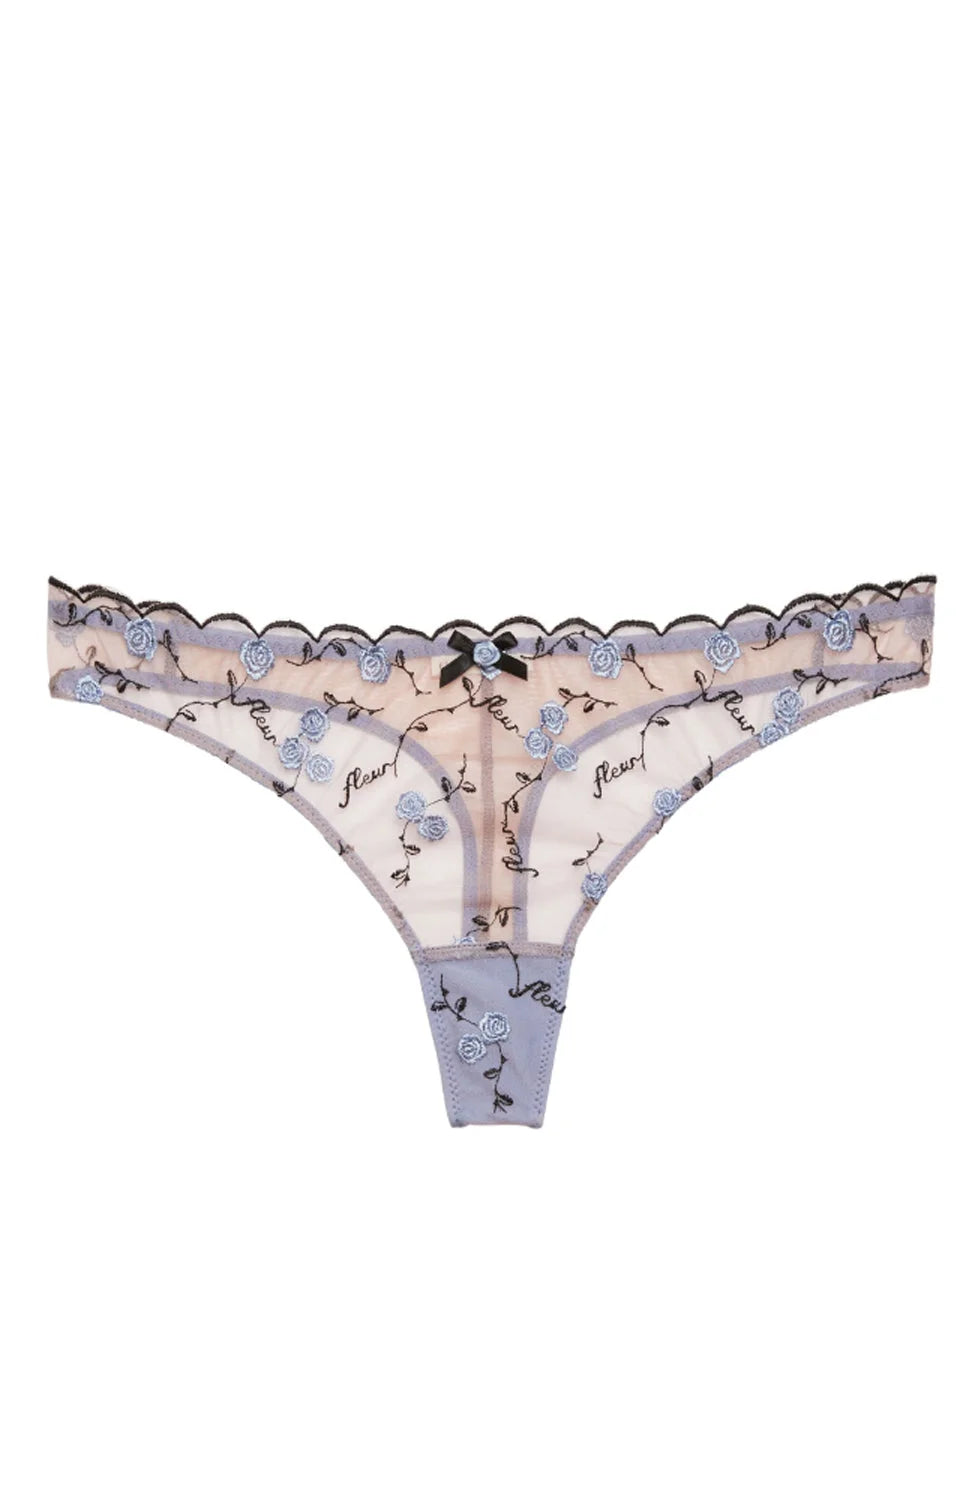 %shop_name_% Fleur du Mal_Rose and Vine Embroidery Thong _ Underwear_